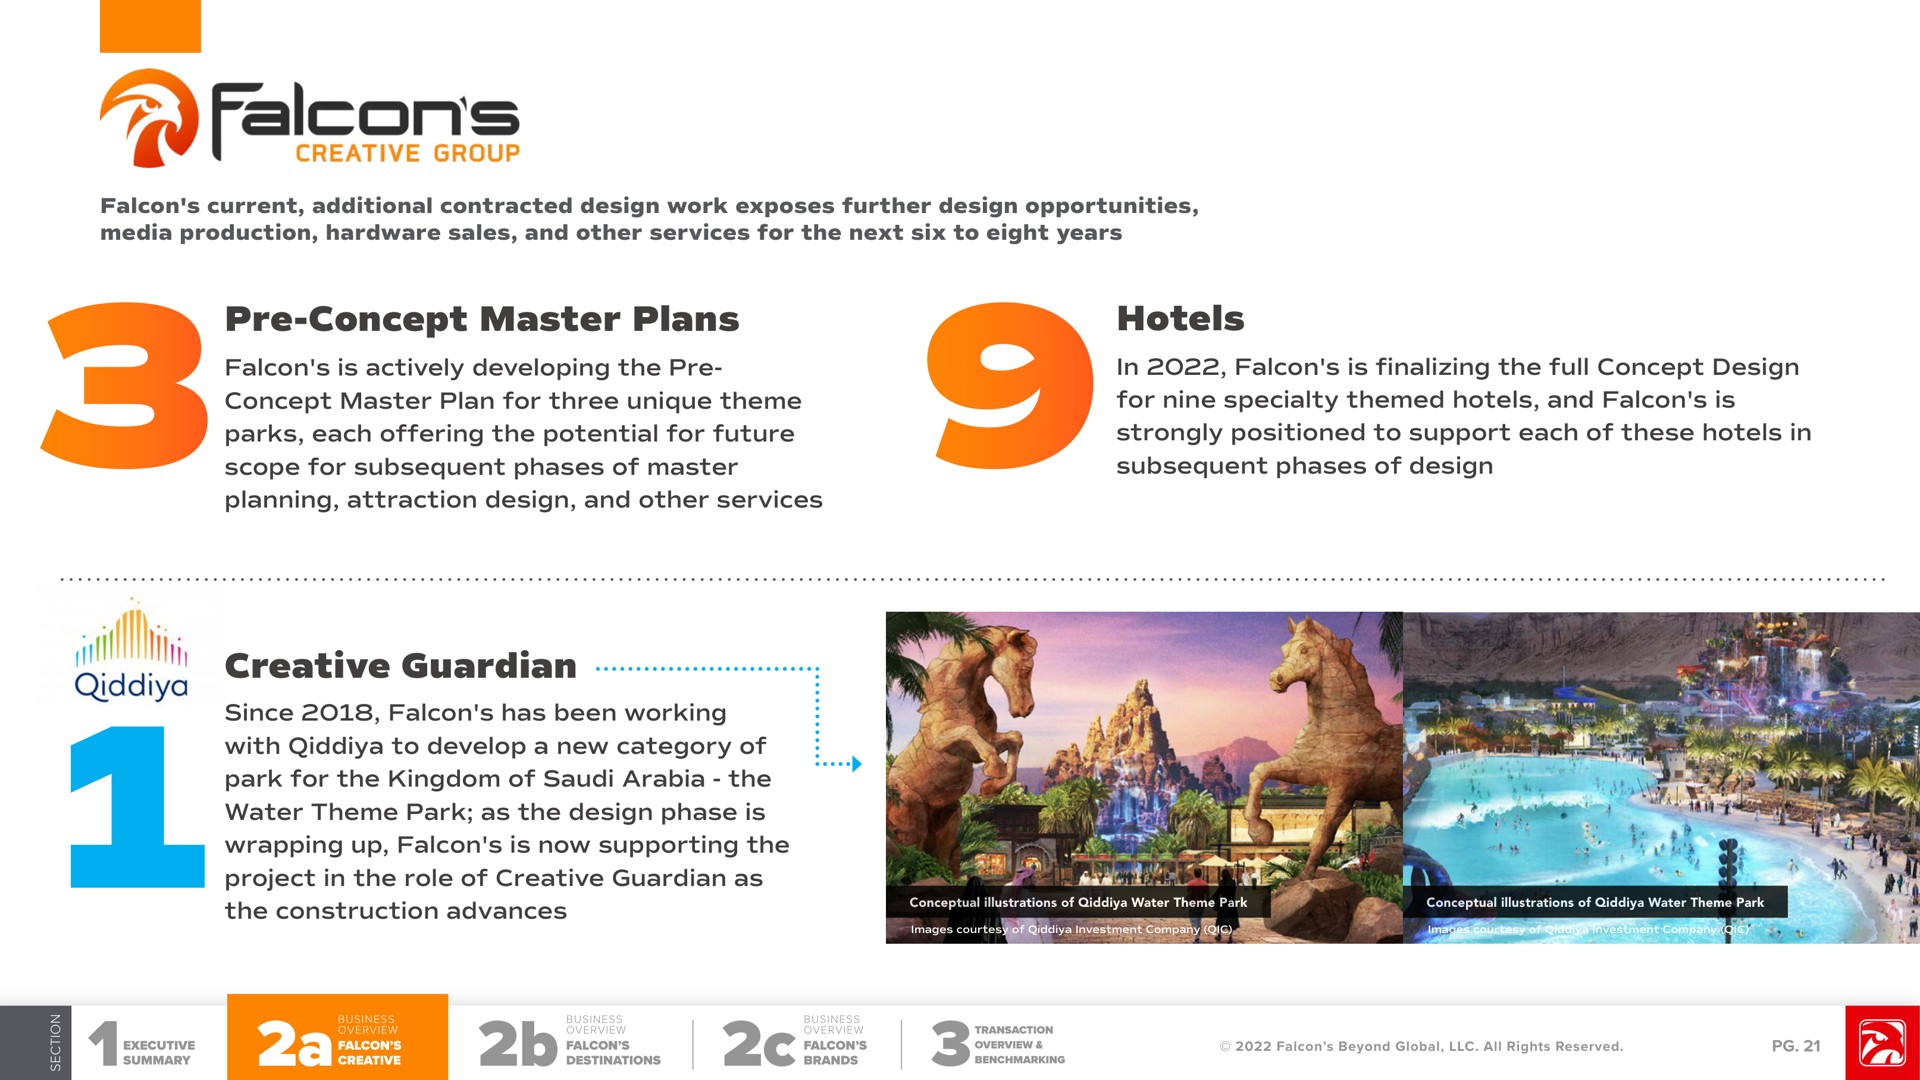 concept master plans falcon is actively developing the concept master plan for three unique theme parks each offering the potential for future scope for subsequent phases of master planning attraction design and other services hotels in falcon is finalizing the full concept design for nine specialty themed hotels and falcon is strongly positioned to support each of these hotels in subsequent phases of design creative guardian since falcon has been working with to develop a new category of park for the kingdom of the water theme park as the design phase is wrapping up falcon is now supporting the project in the role of creative guardian as the construction advances falcons it tat | Falcon's Beyond